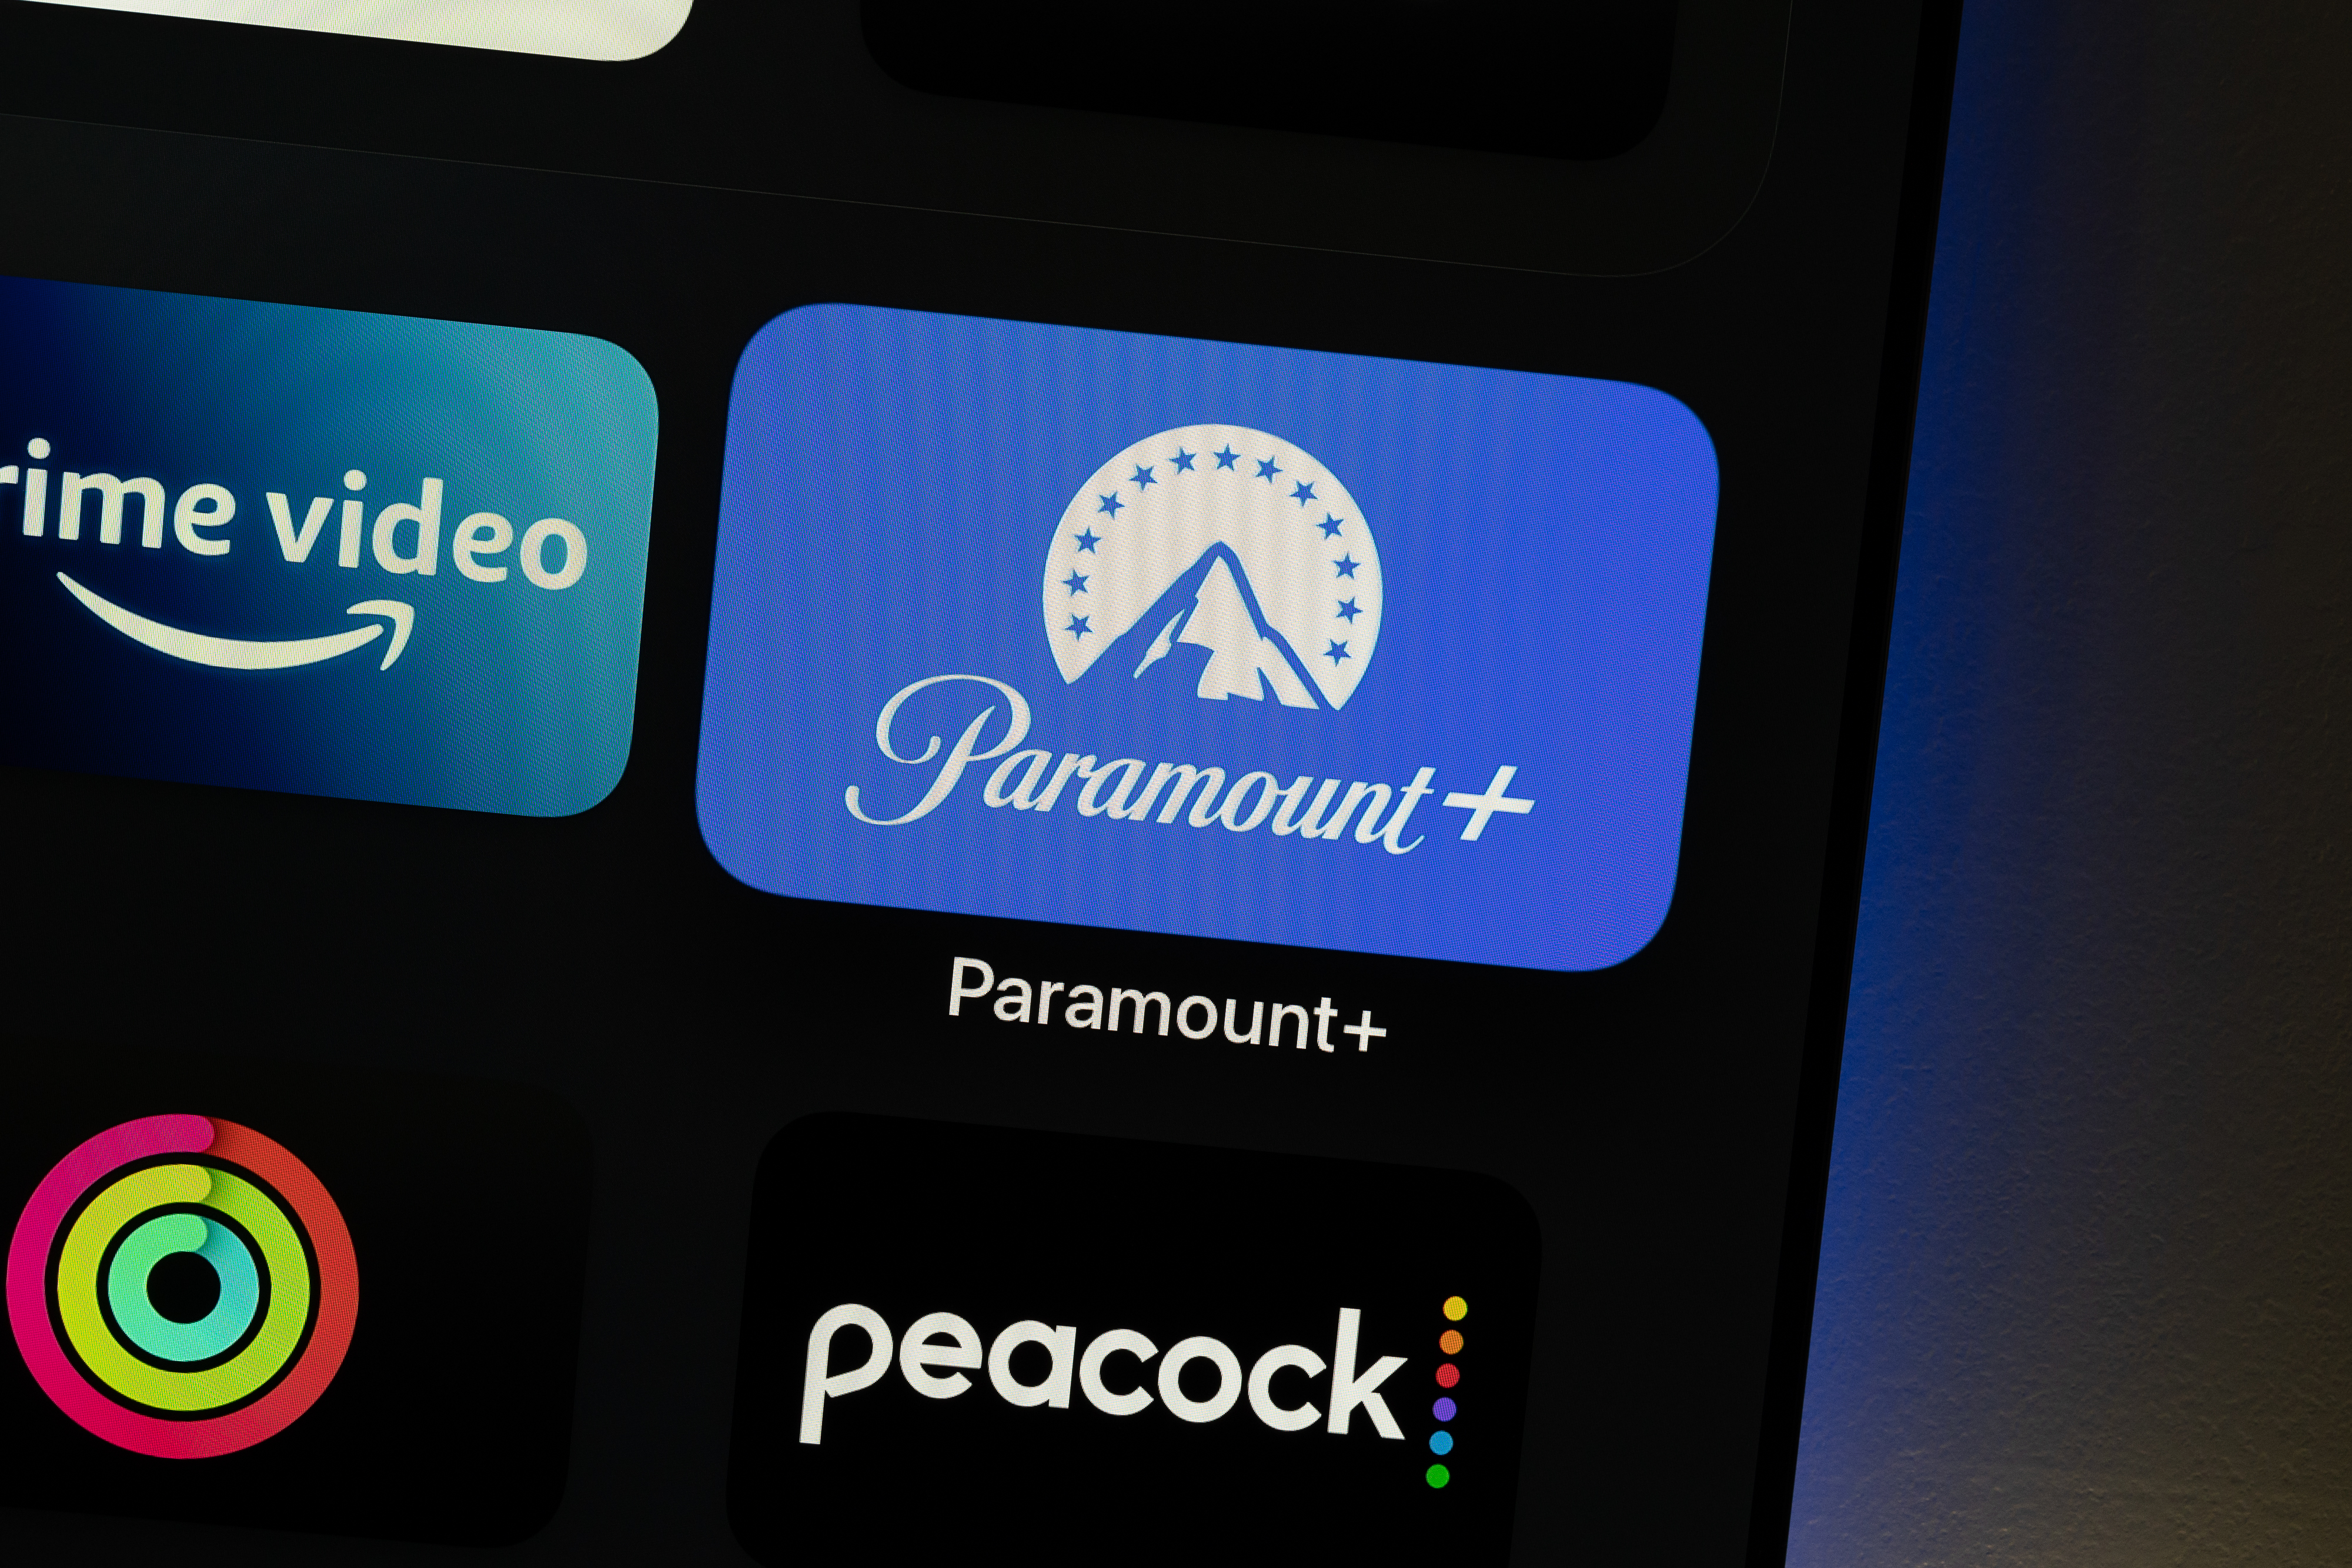 Paramount+ sets new record for NFL streams